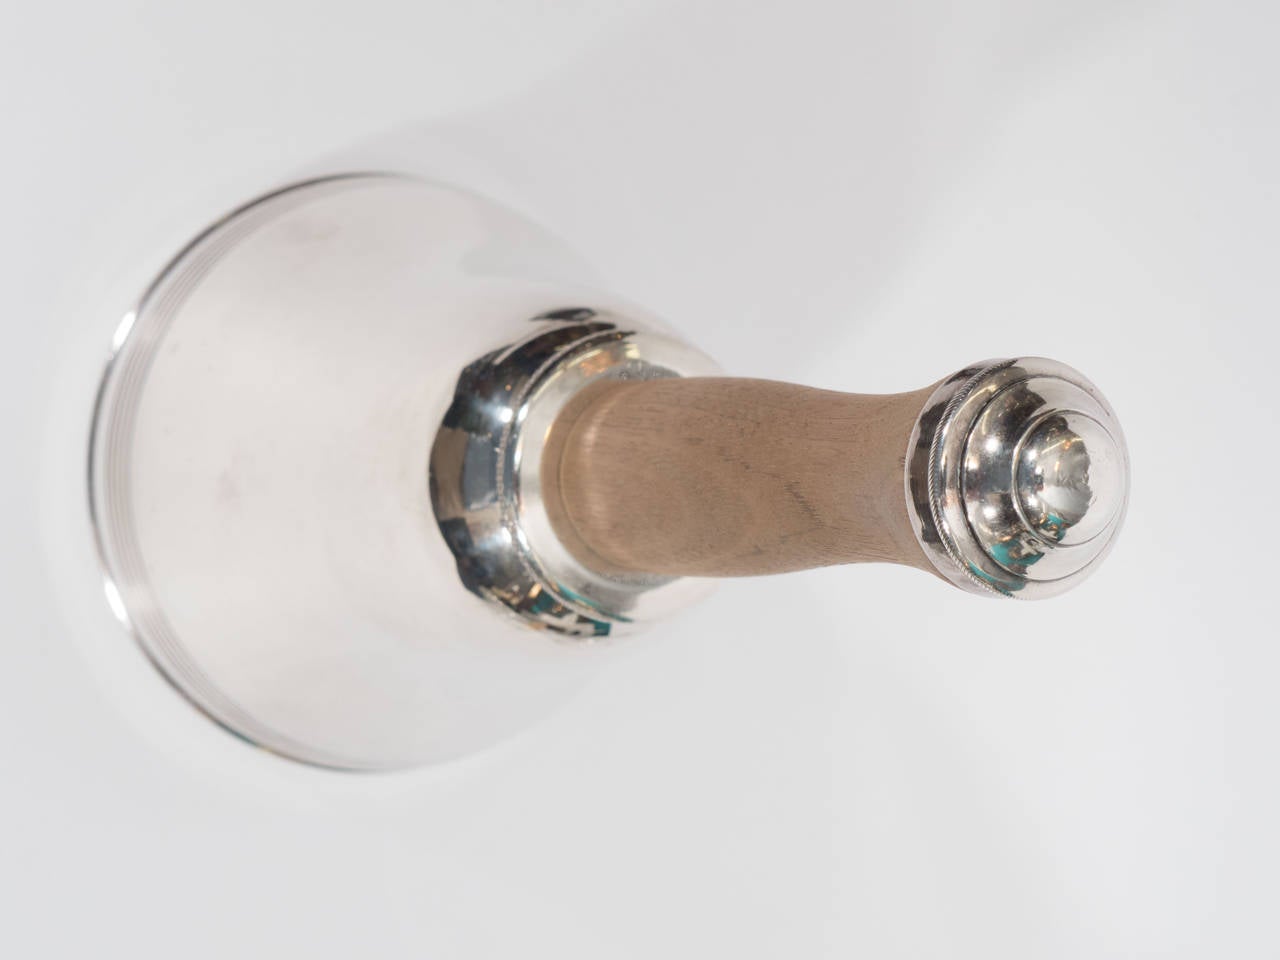 A vintage silver plate cocktail shaker with a wooden handle and in the shape of a bell, circa 1930s-1940s.

Good vintage condition with age appropriate wear. Some scratches.